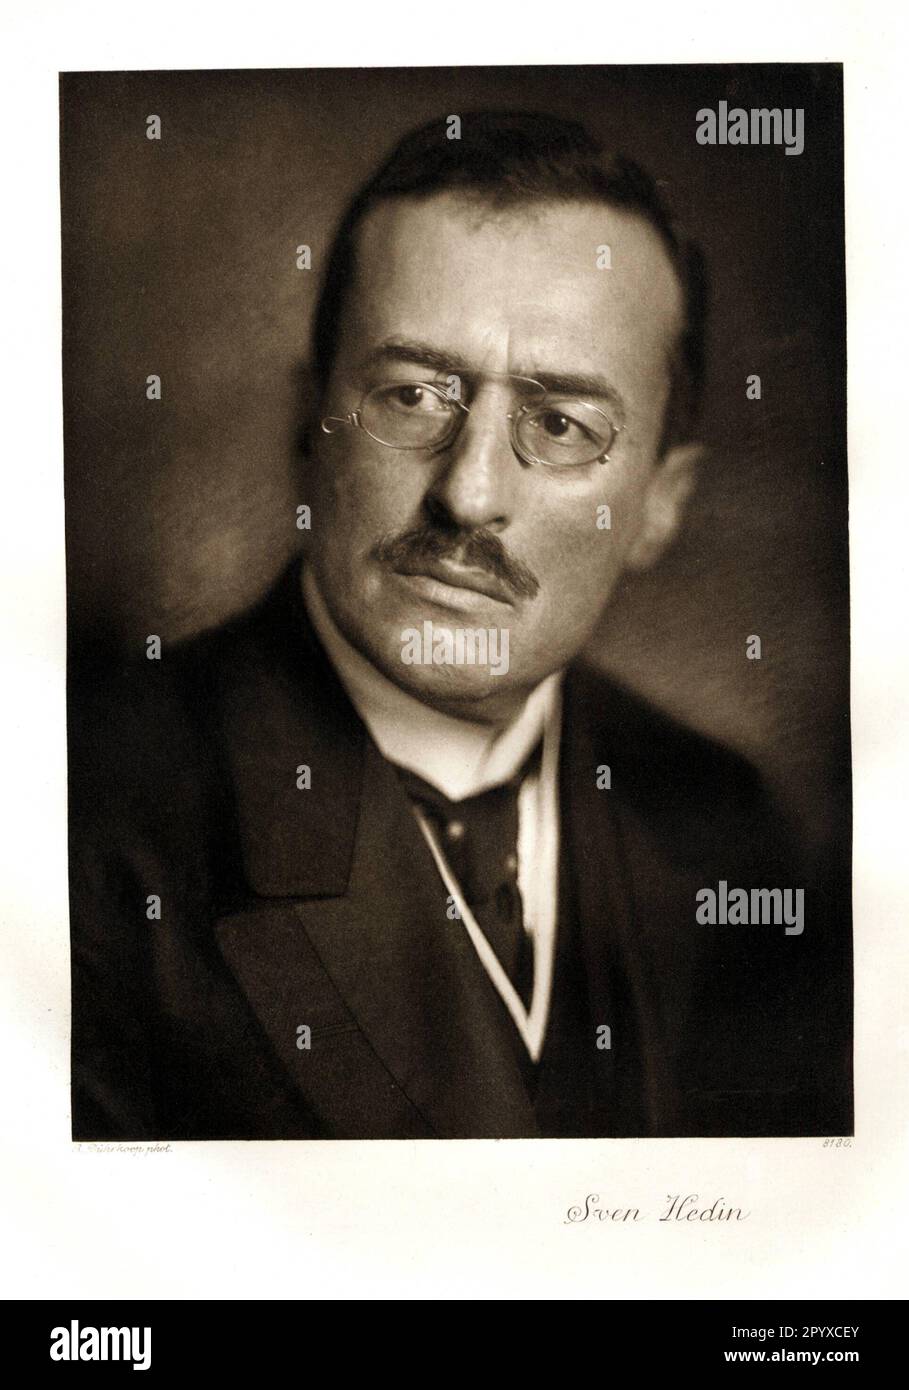 Sven Anders Hedin (1865-1952), Swedish explorer of Asia. Photograph by R. Dührkoop. Photo: Heliogravure, Corpus Imaginum, Hanfstaengl Collection. Undated photograph, probably taken in the 1920s. [automated translation] Stock Photo